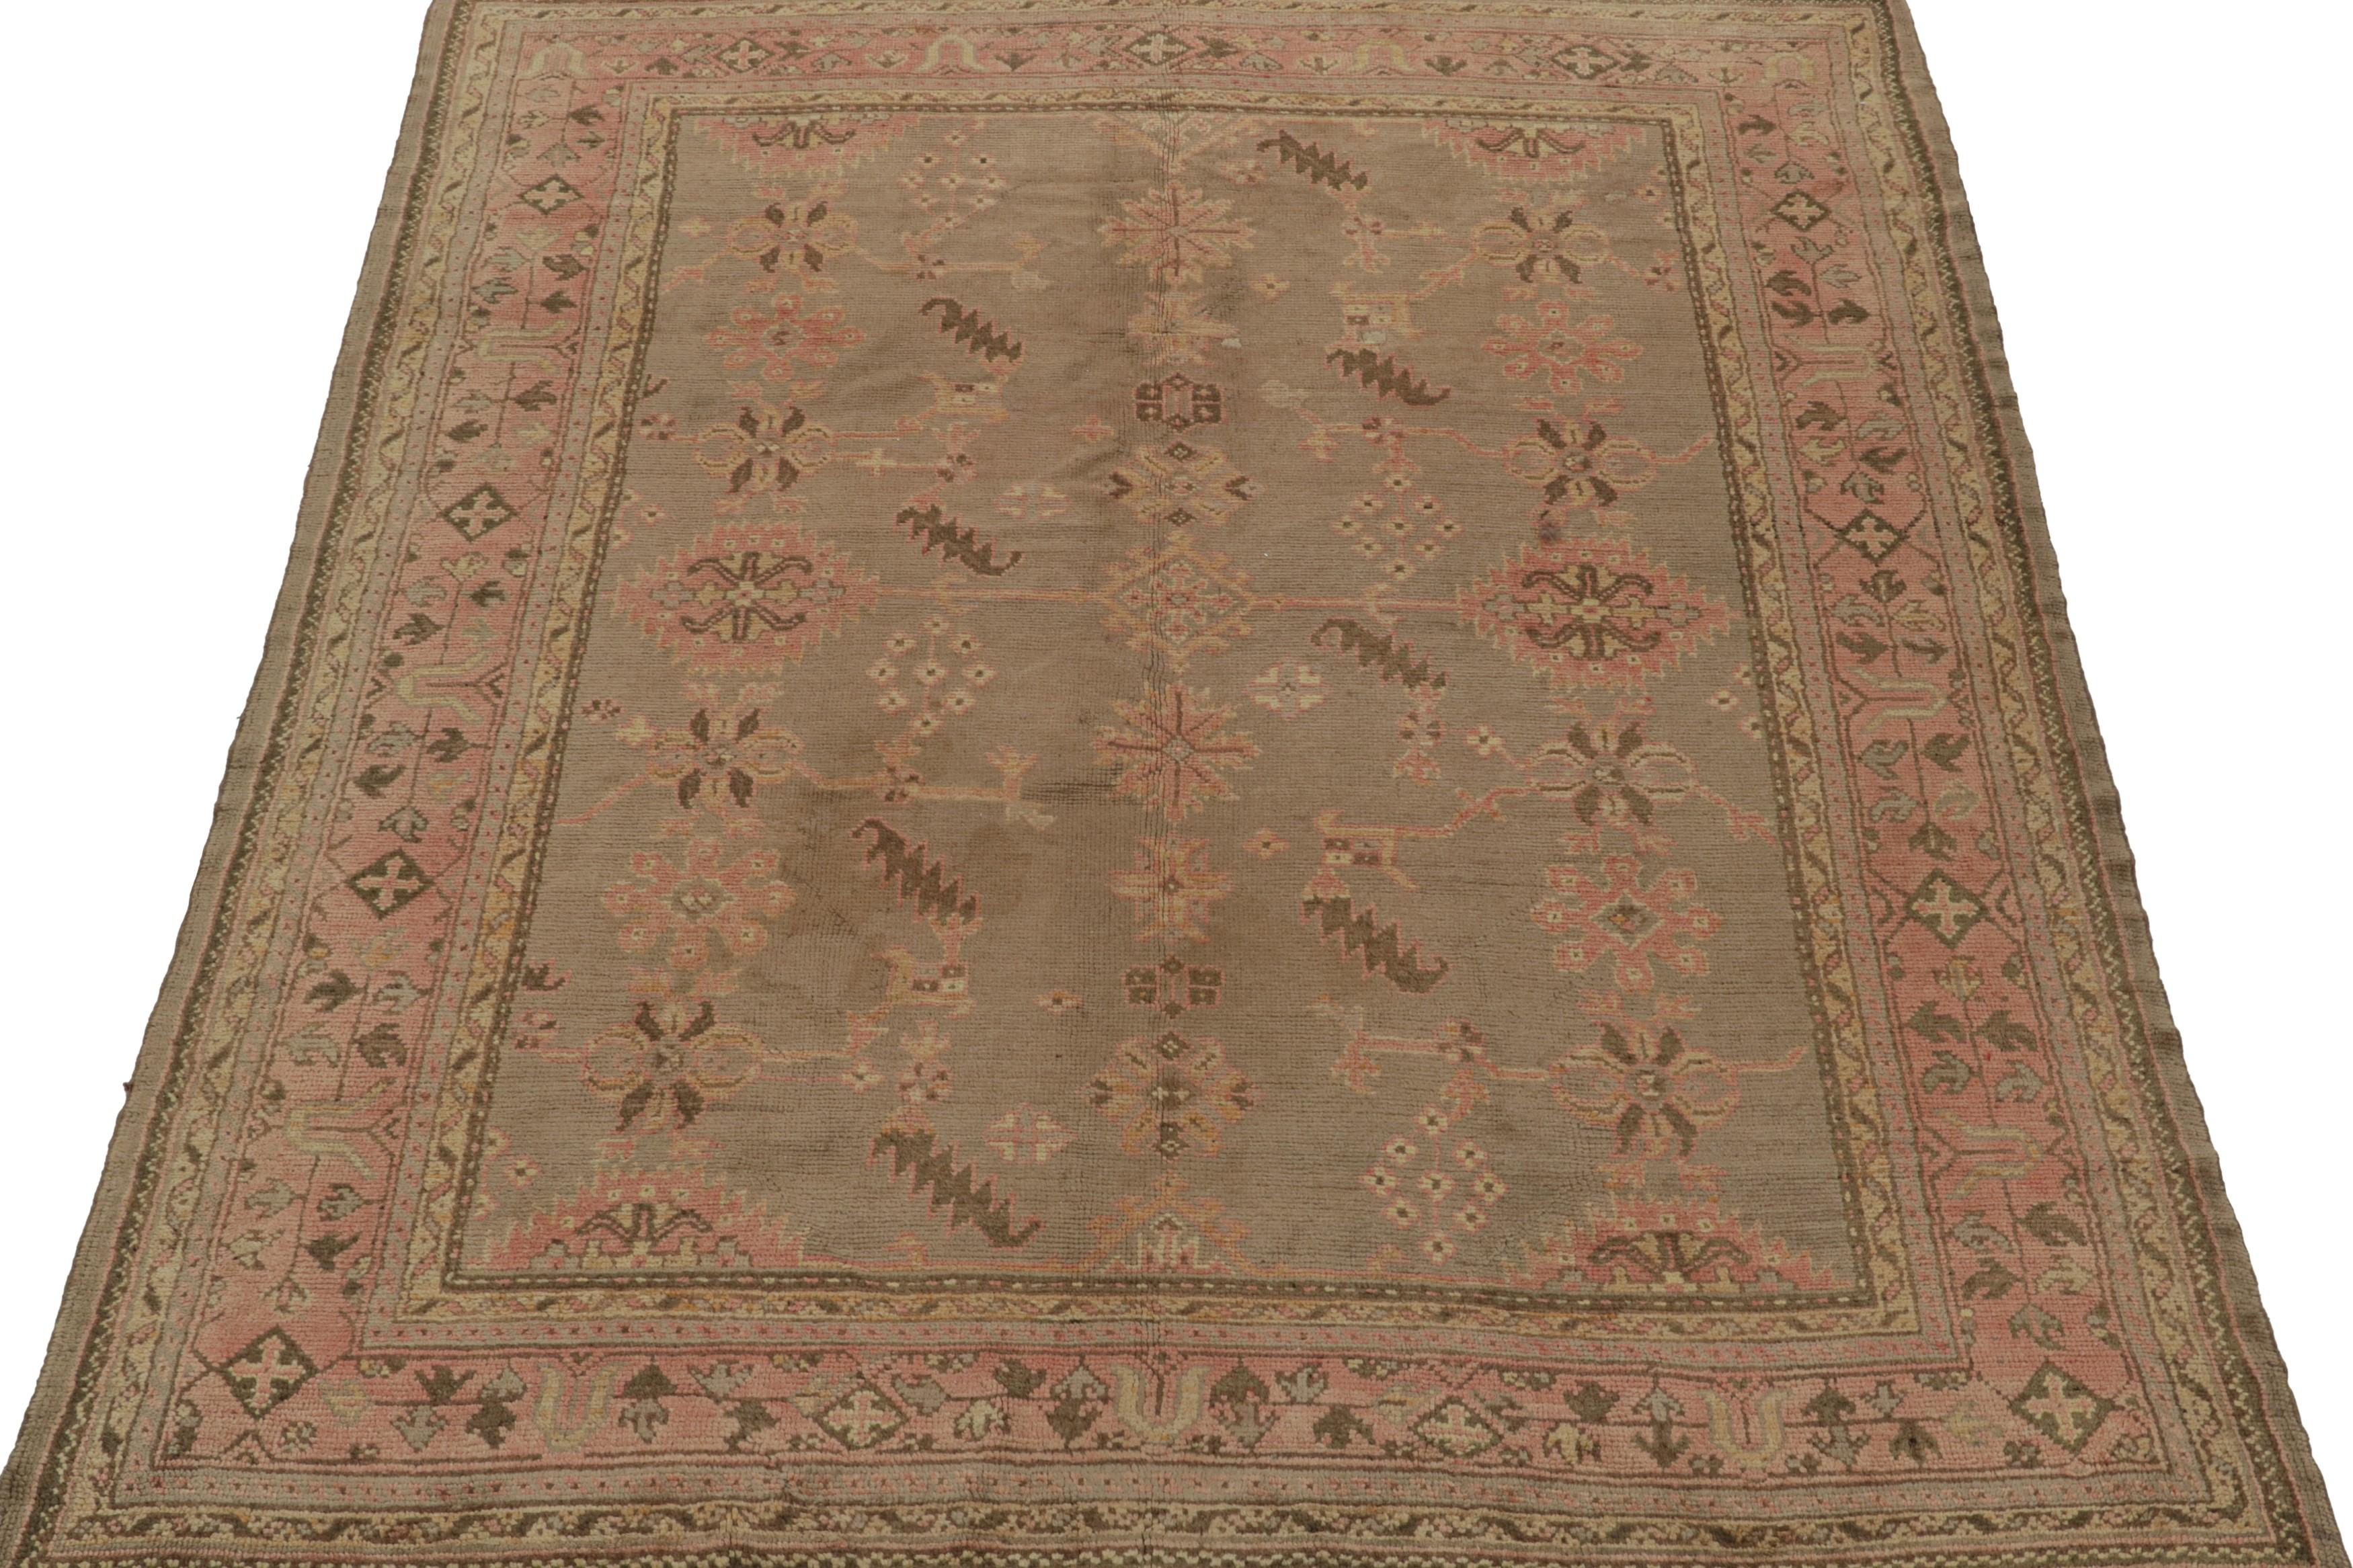 Vintage Oushak Rug with Beige-Brown and Pink Floral Patterns, from Rug & Kilim In Good Condition For Sale In Long Island City, NY